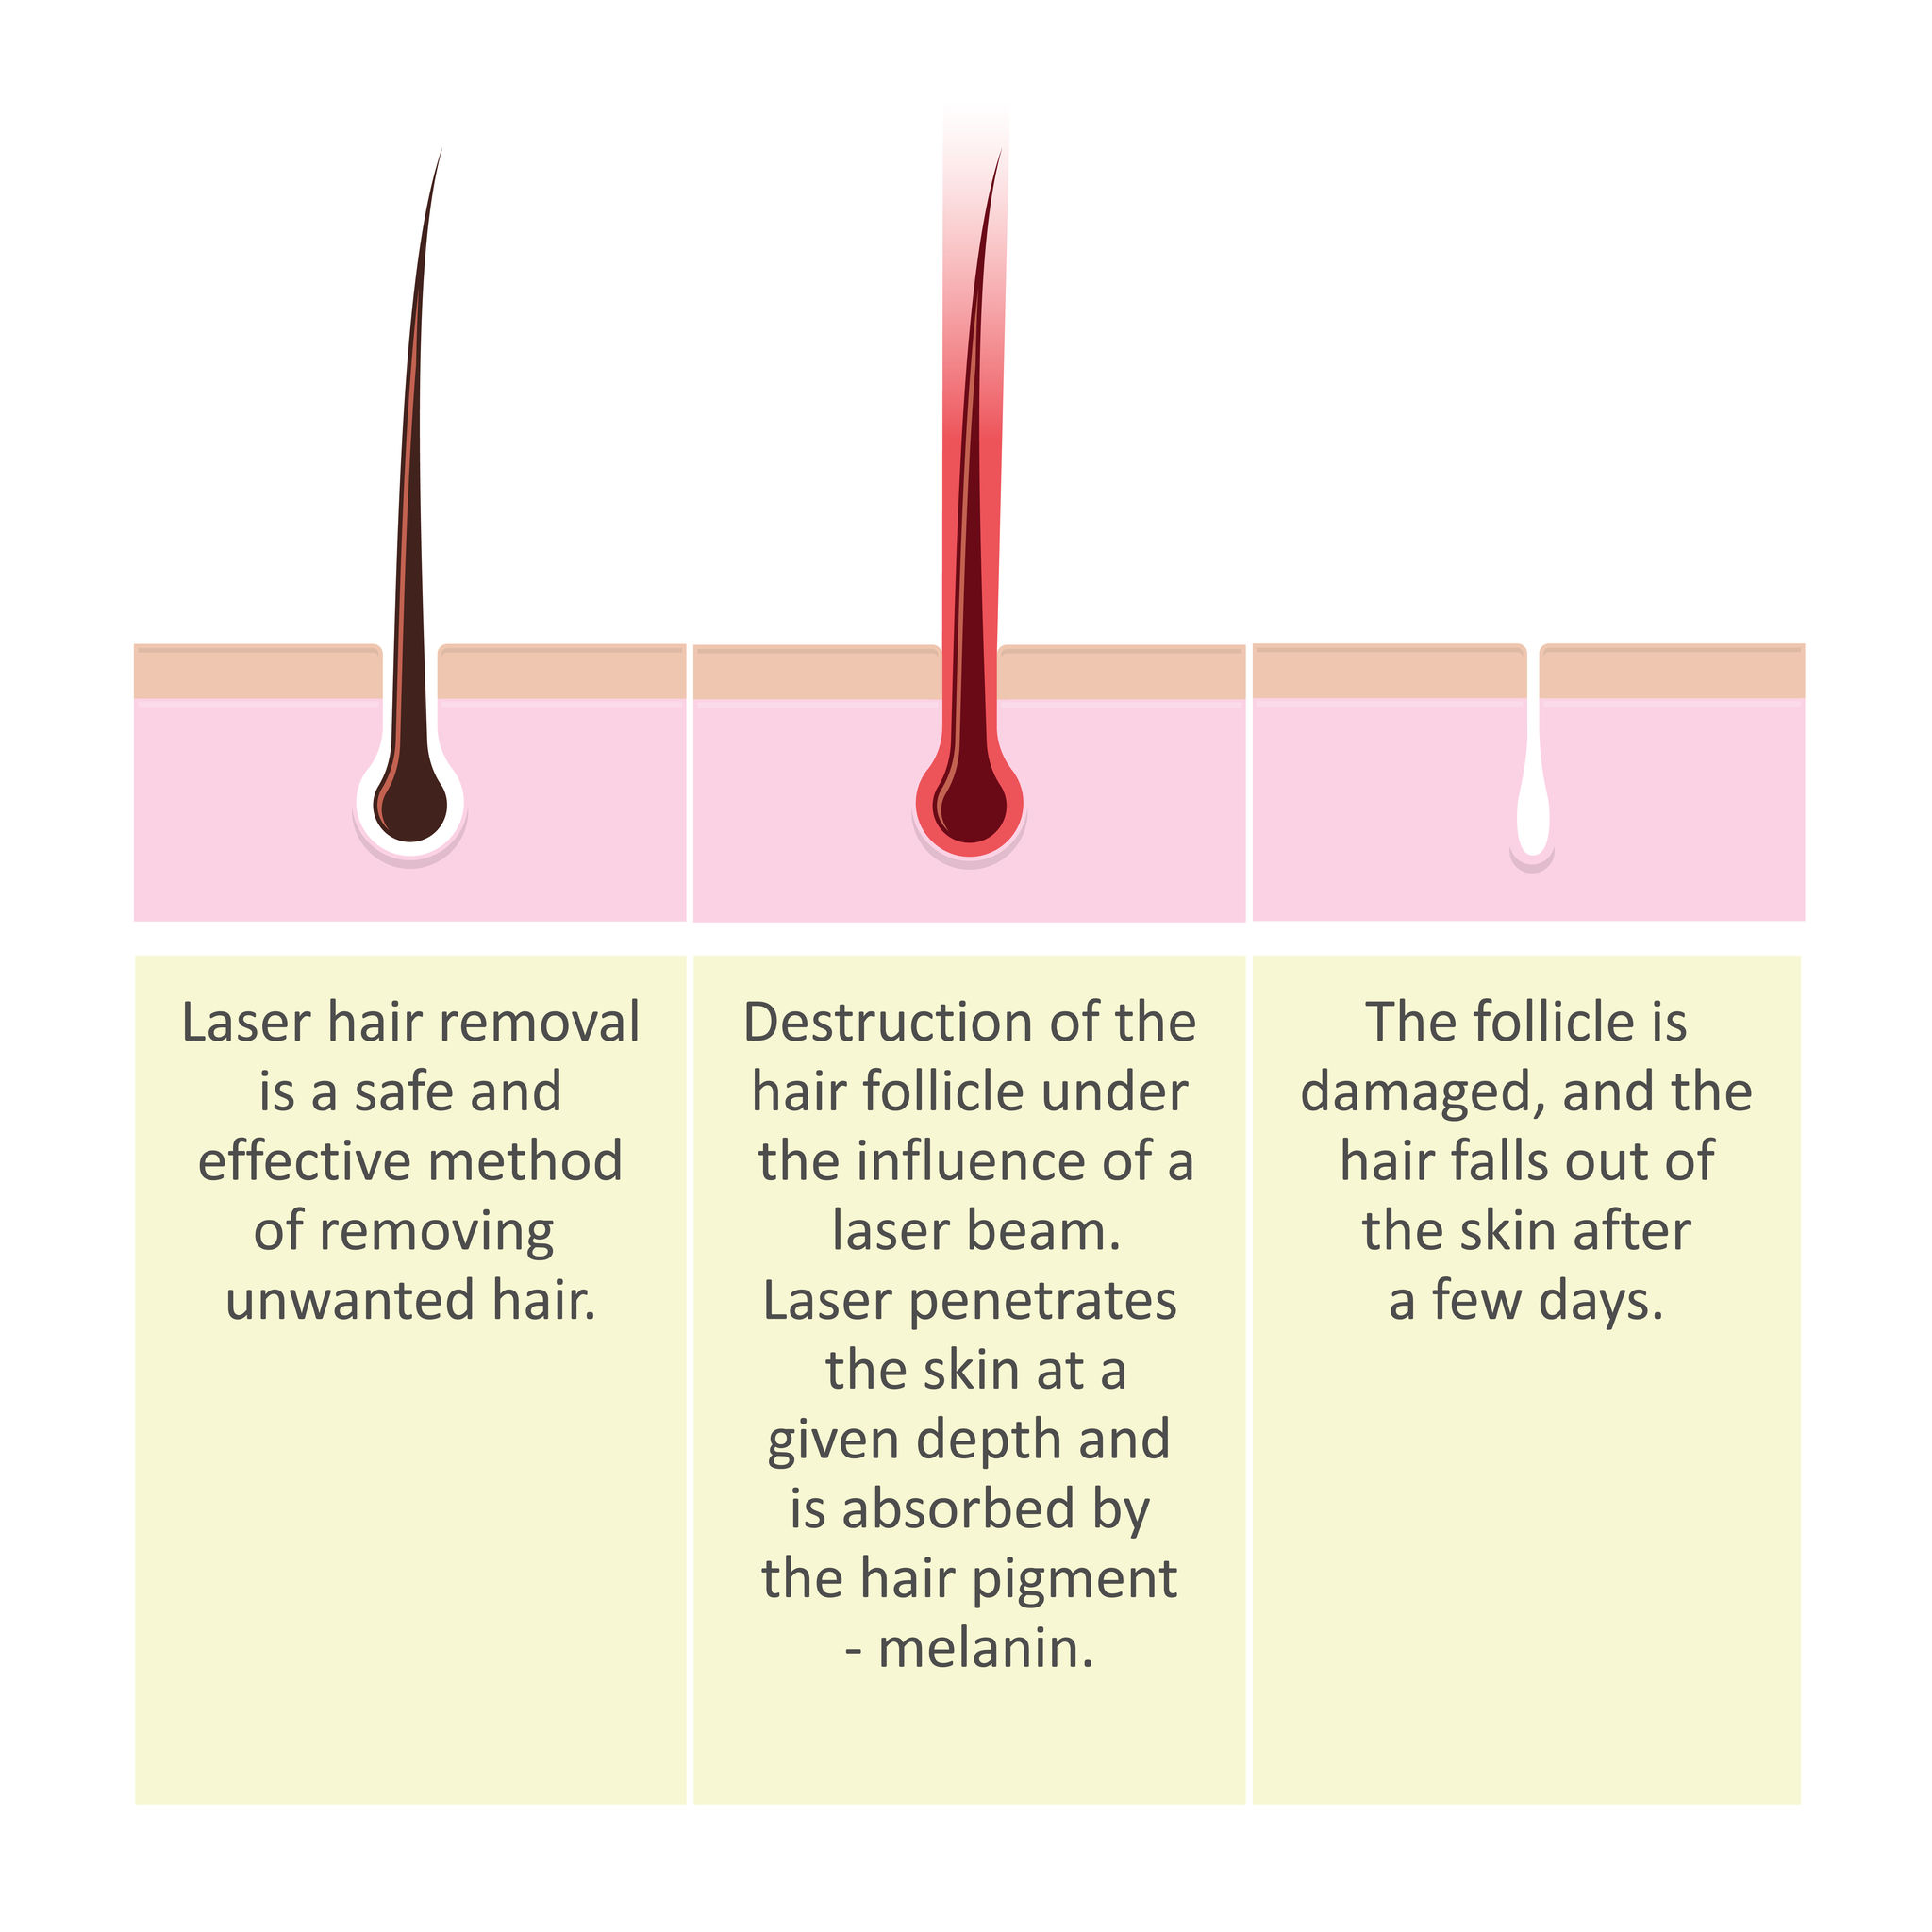 How Long Does It Take Hair To Fall Out After A Laser Hair Removal Treatment?